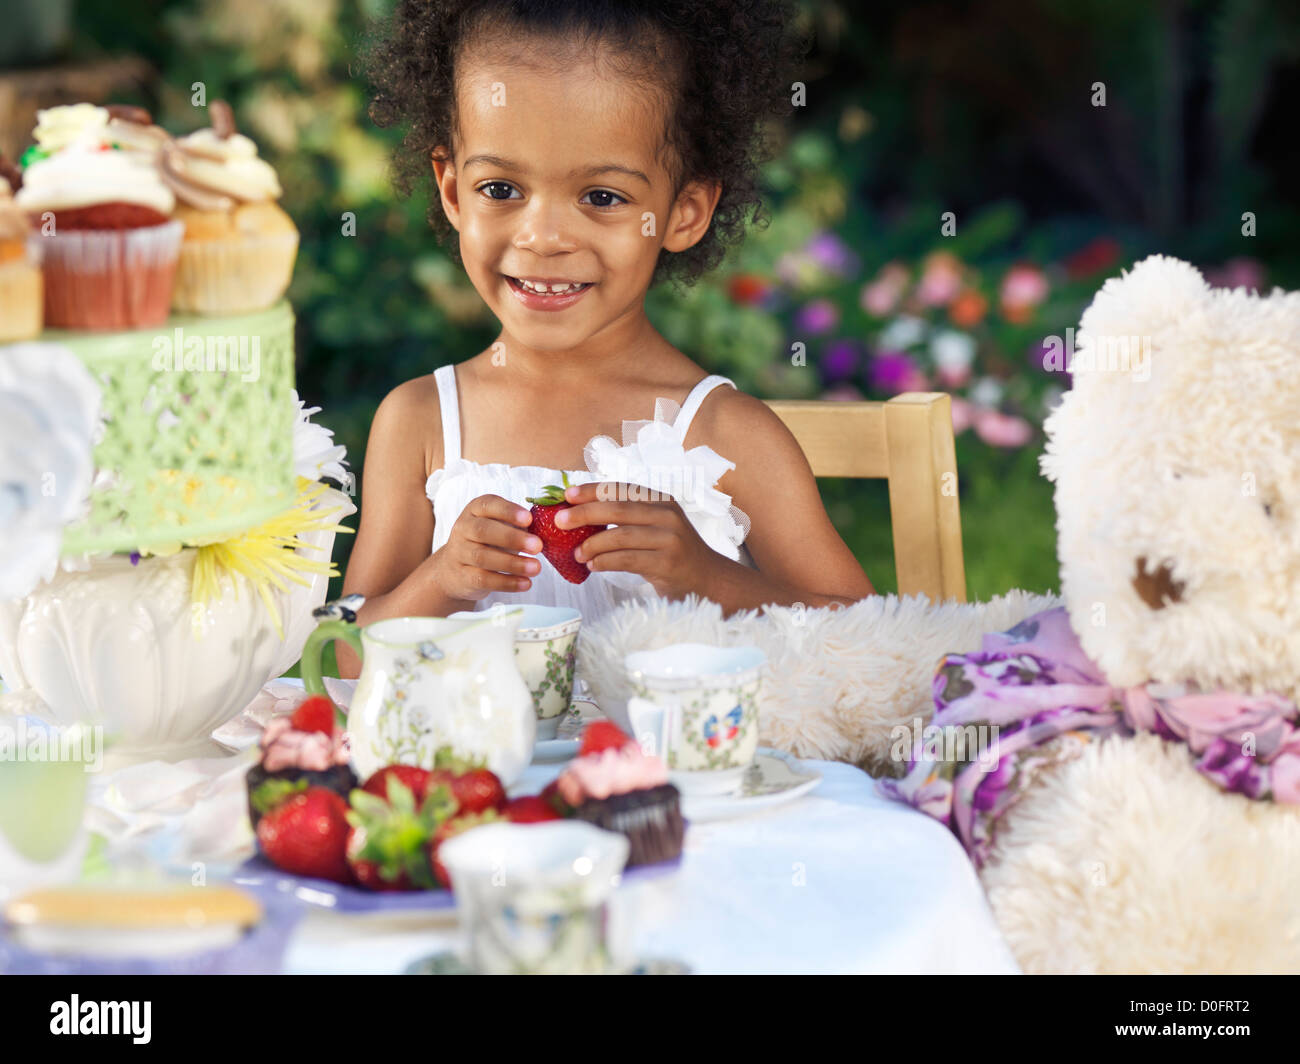 License available at MaximImages.com - Happy smiling girl having an outdoor summer party. Drinking tea with cupcakes. Stock Photo